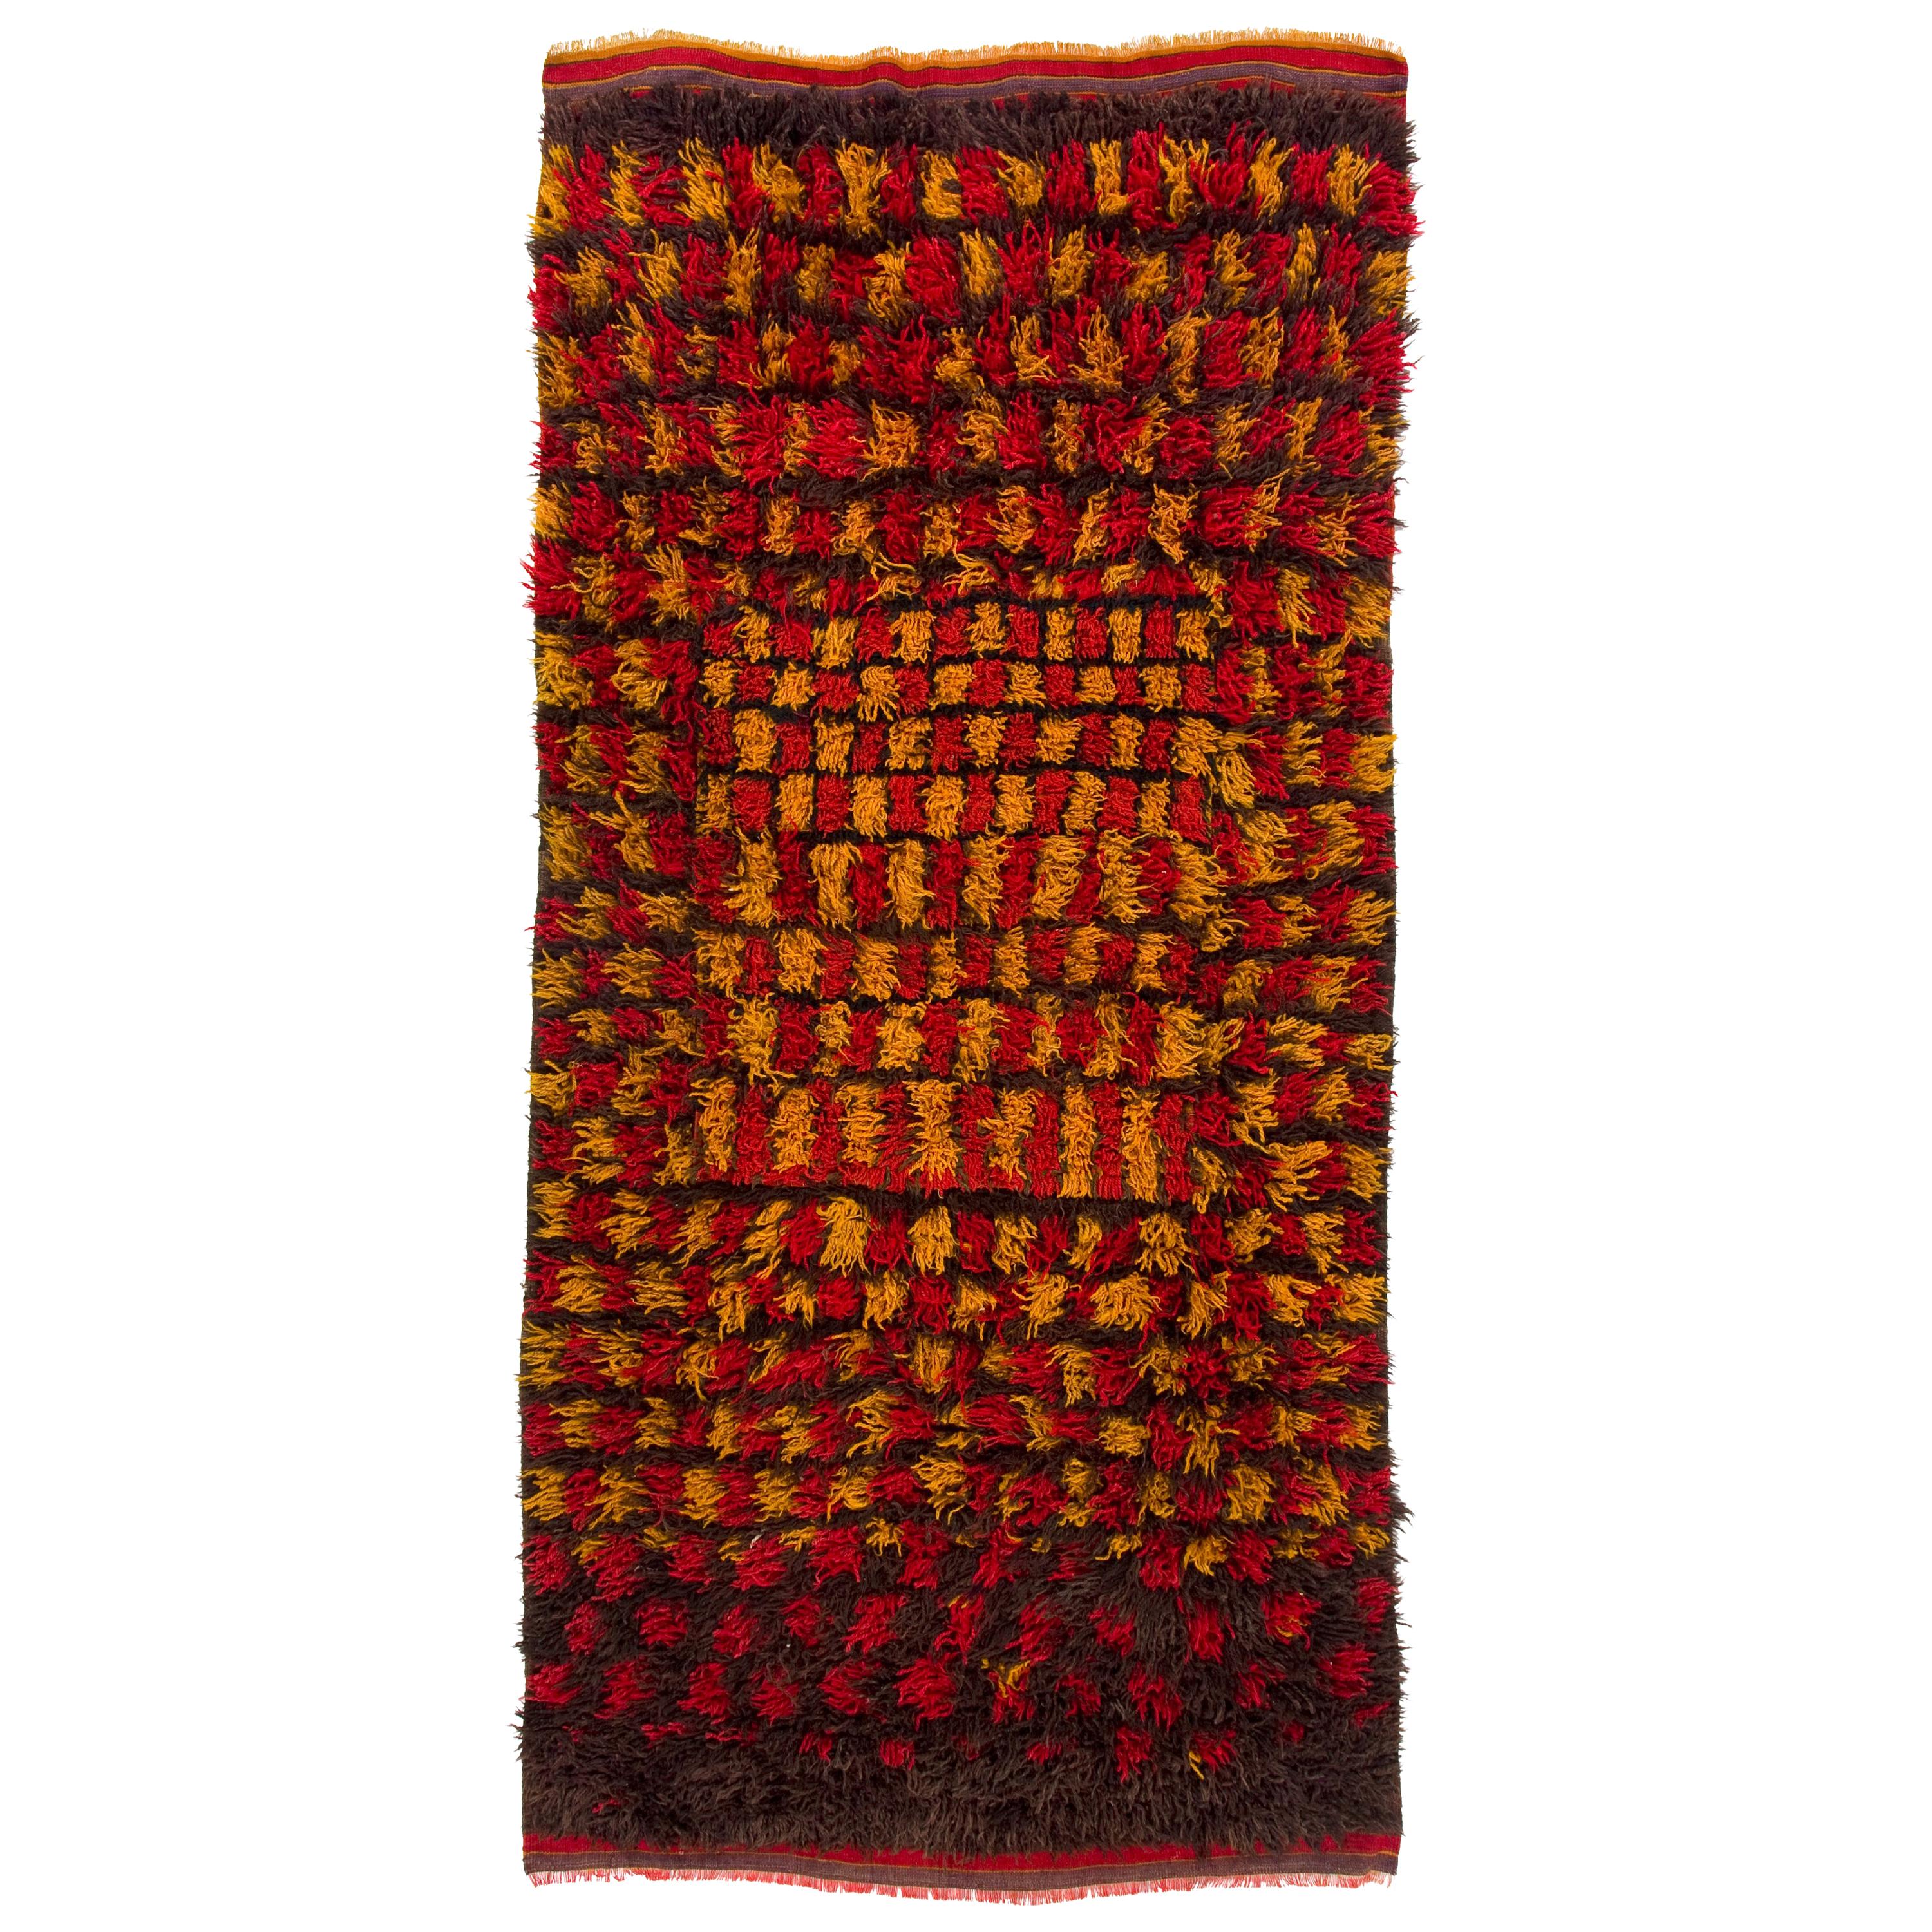 4.8x9.8 Ft Handmade "Tulu" Rug with Long Wool Pile in Red, Yellow & Brown Colors For Sale